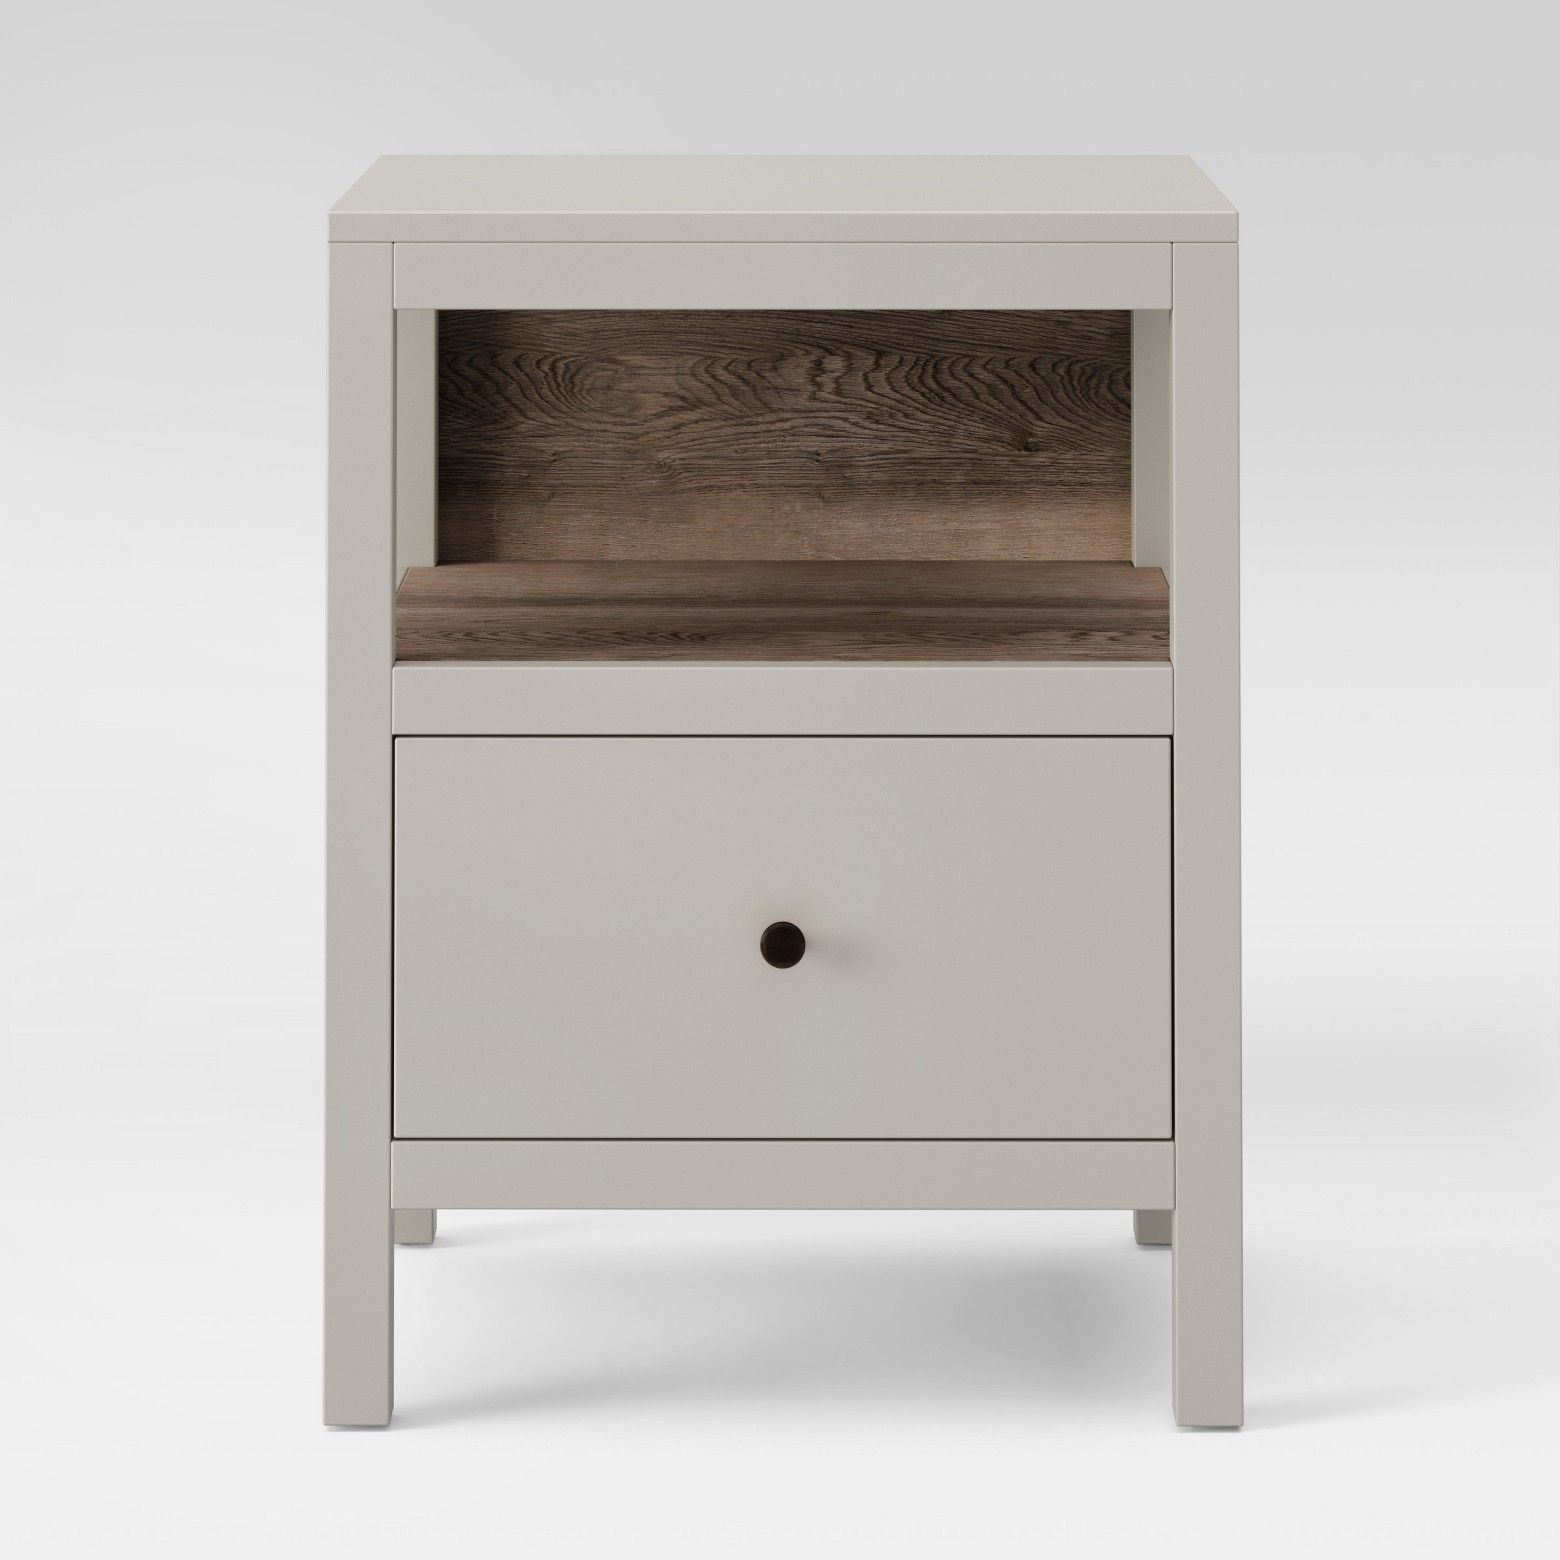 rustic style gets sleek modern update with this hadley accent table drawer from thresholda versatile features one shelf farmhouse dining set shabby chic chairs blue oriental lamp